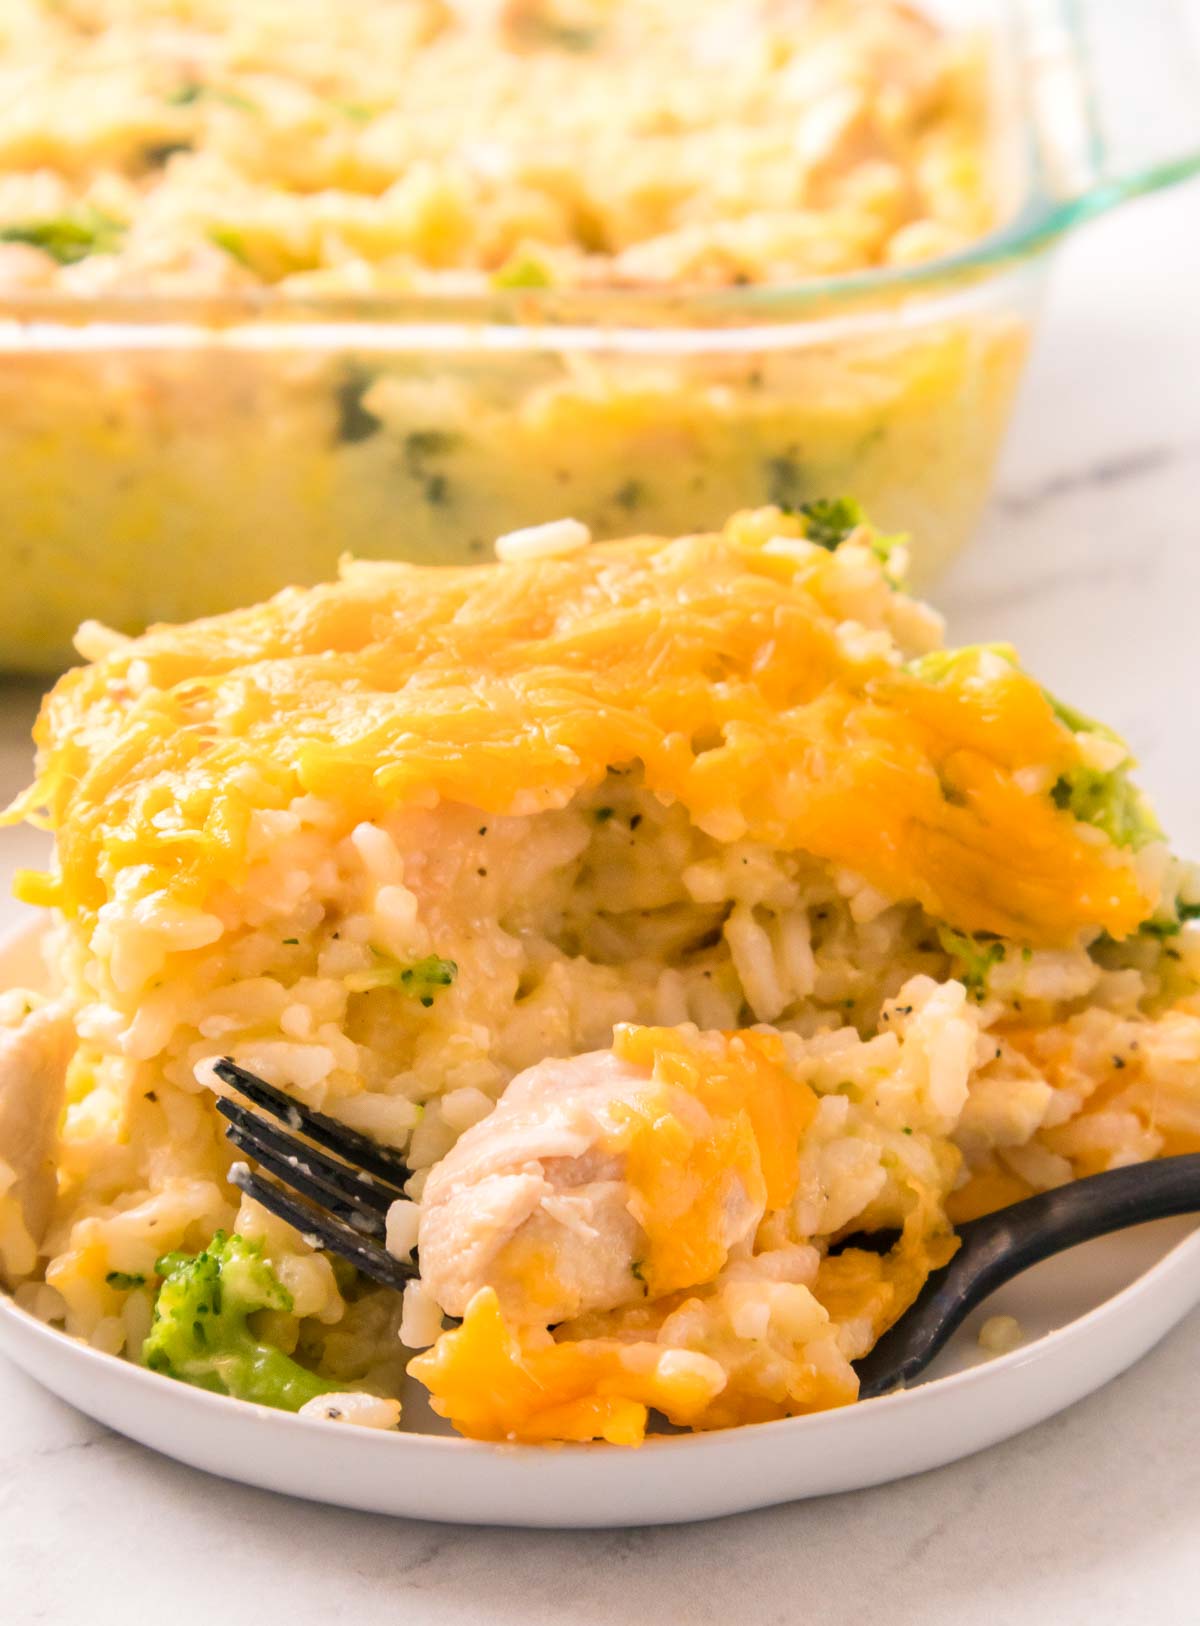 Close up of a chicken and broccoli rice casserole to show texture